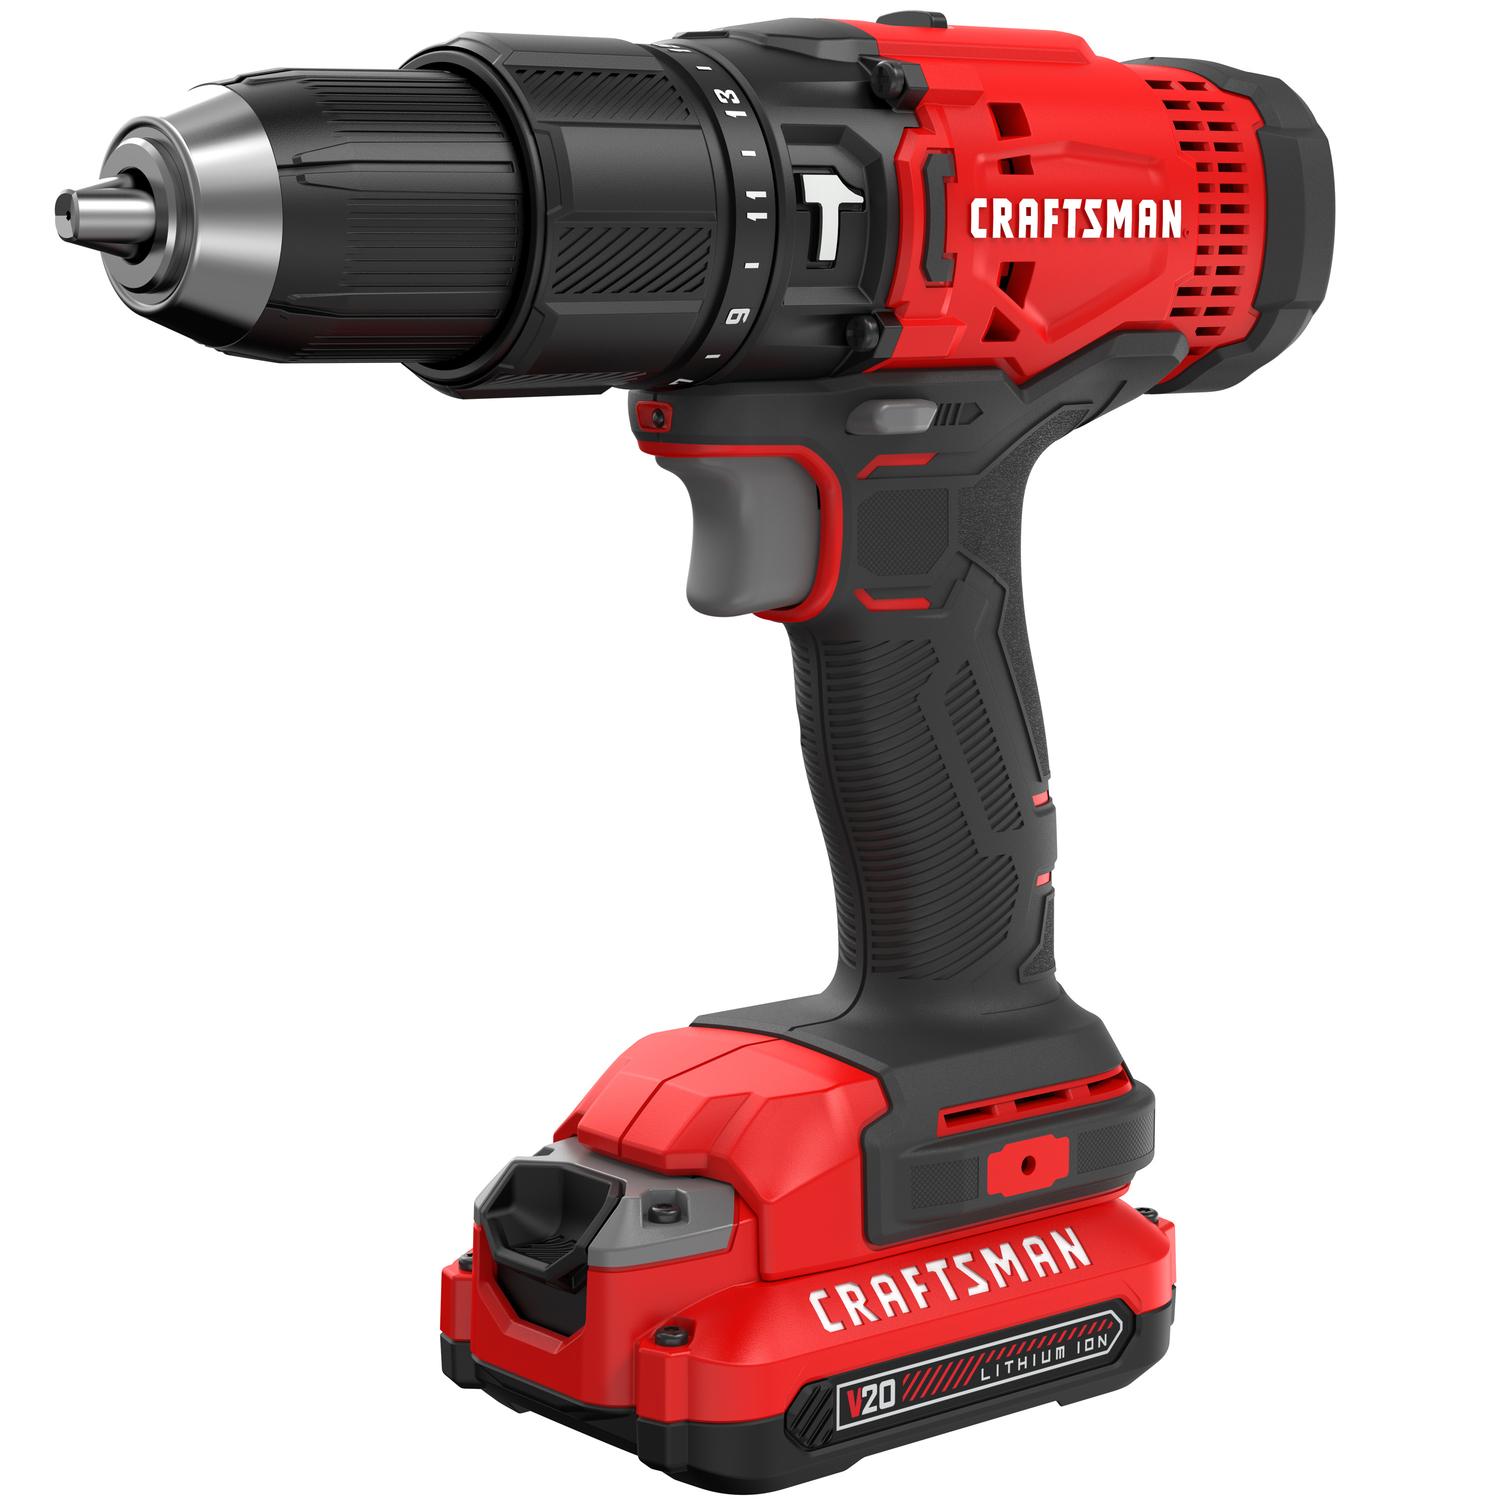 UPC 885911548717 product image for Craftsman 20V MAX 1/2 in. Brushless Cordless Compact Hammer Drill/Driver Kit 150 | upcitemdb.com